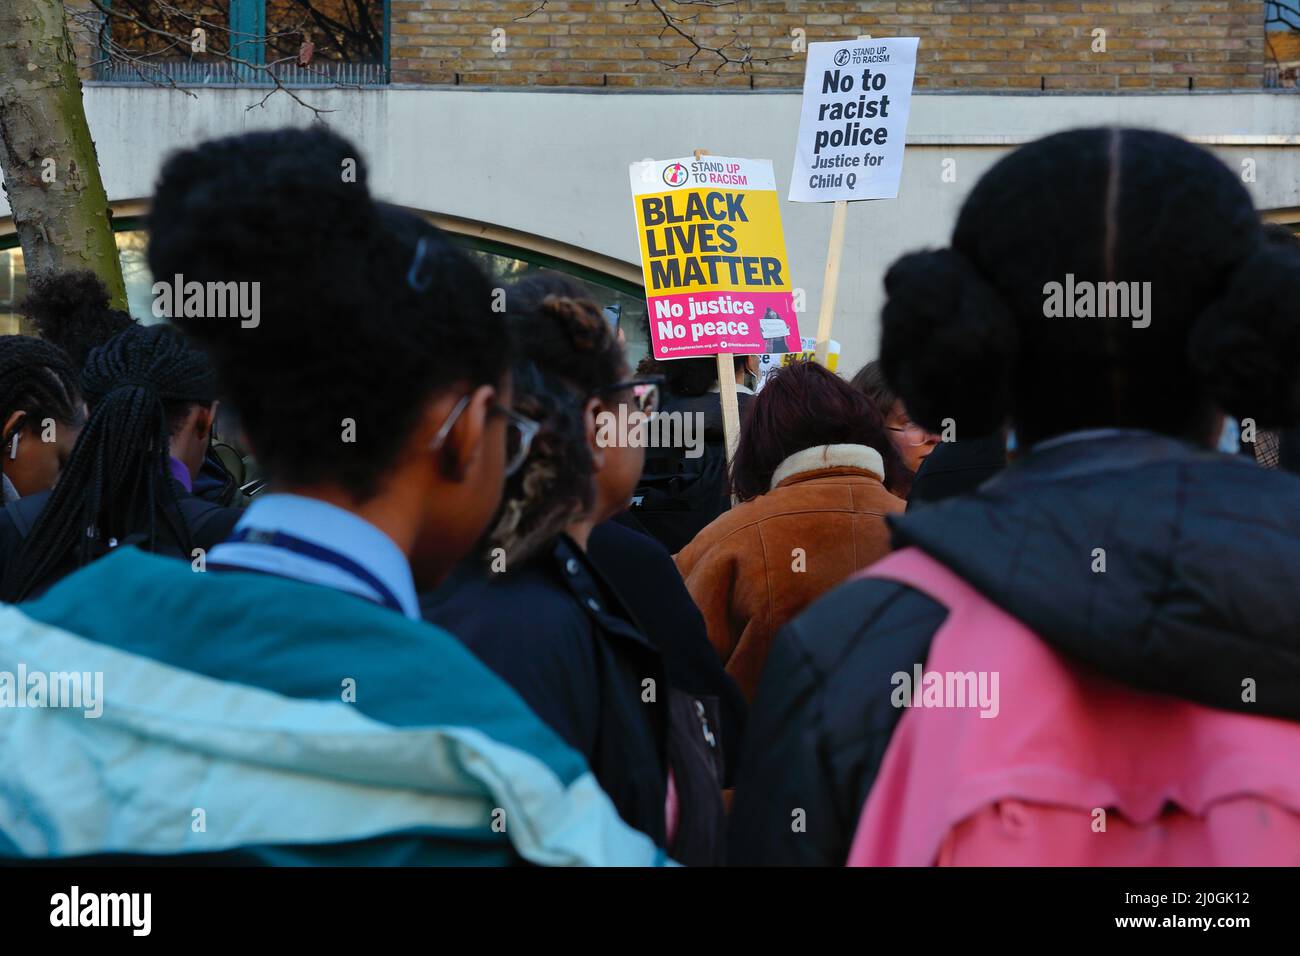 London (UK), 18.03.2022: Protesters gather outside Stoke Newington Police Station in Hackney to demonstrate against the strip- search by police of a s Stock Photo